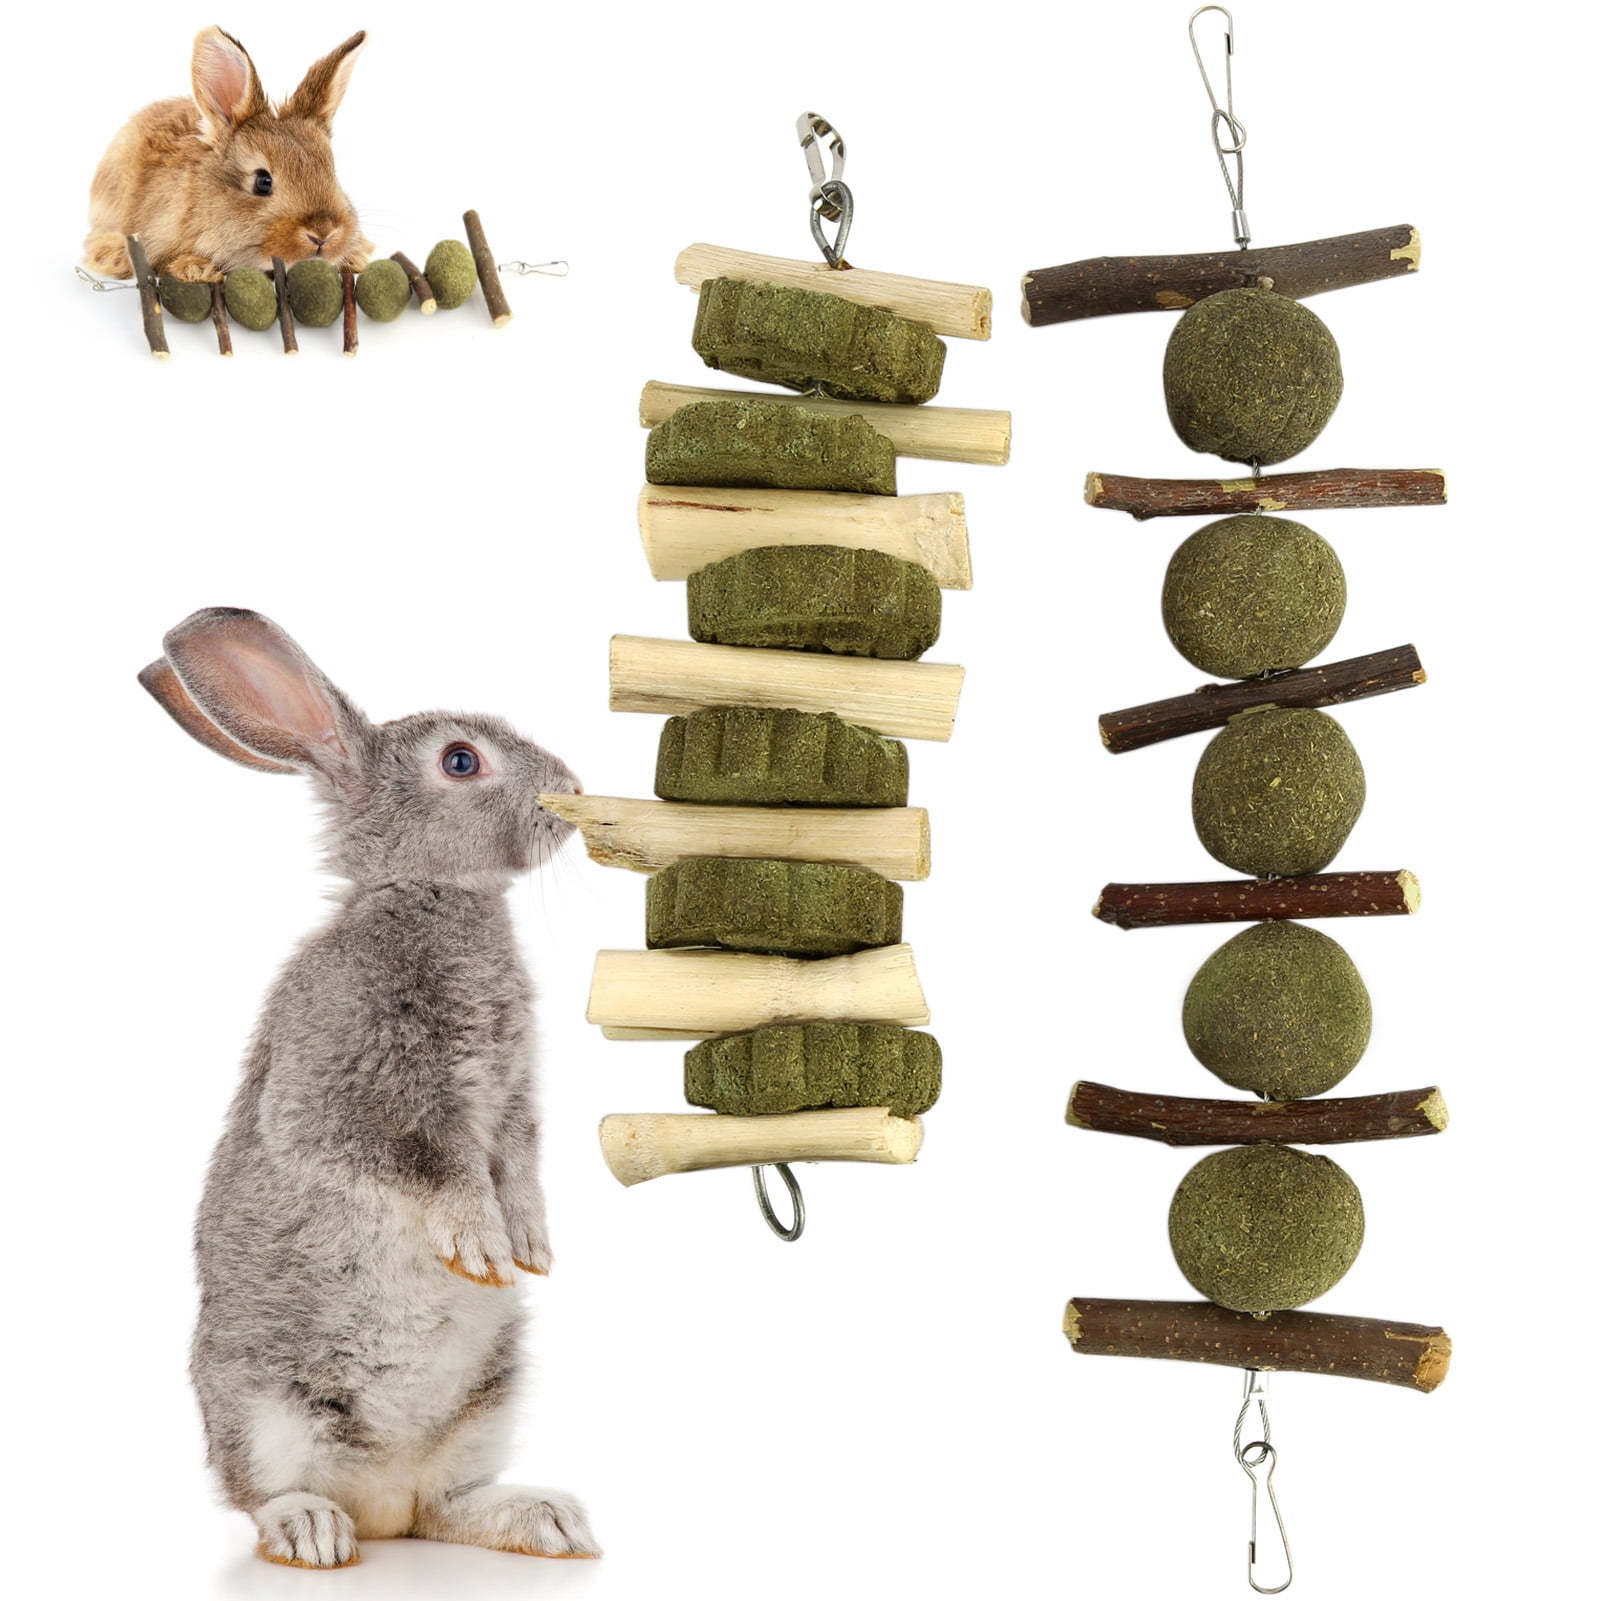 Double Head Suspension Natural Apple Wood Sticks with Timothy Grass Balls Improve Dental Health for Rabbits Chinchilla Hamsters Guinea Pigs Gerbils Squirrels Rabbit Chew Toys for Teeth 